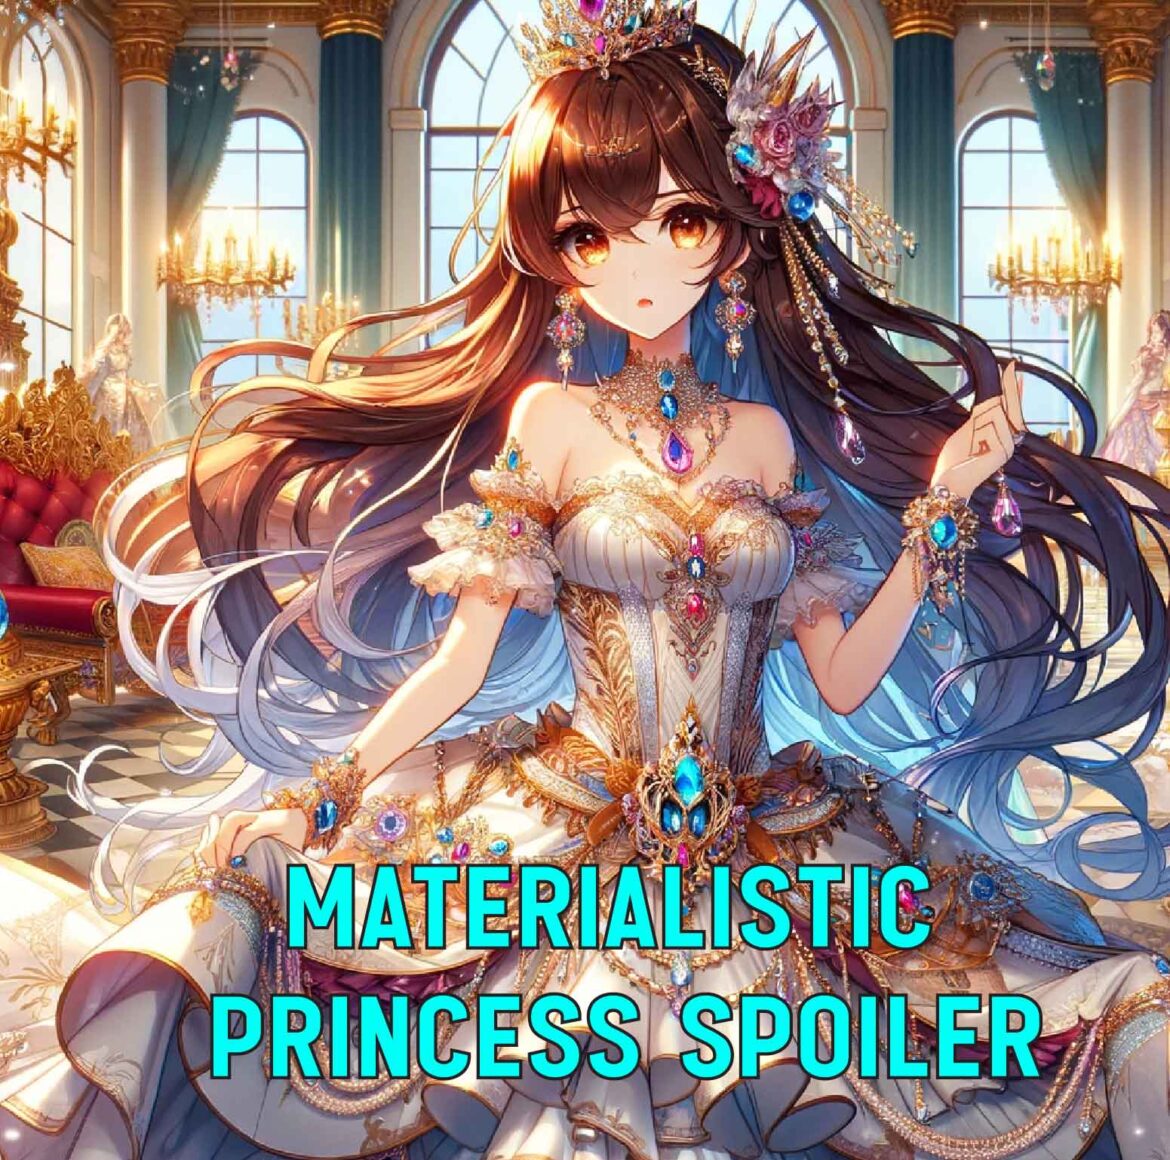 Inside the Royal Lifestyle: Materialistic Princess Spoilers